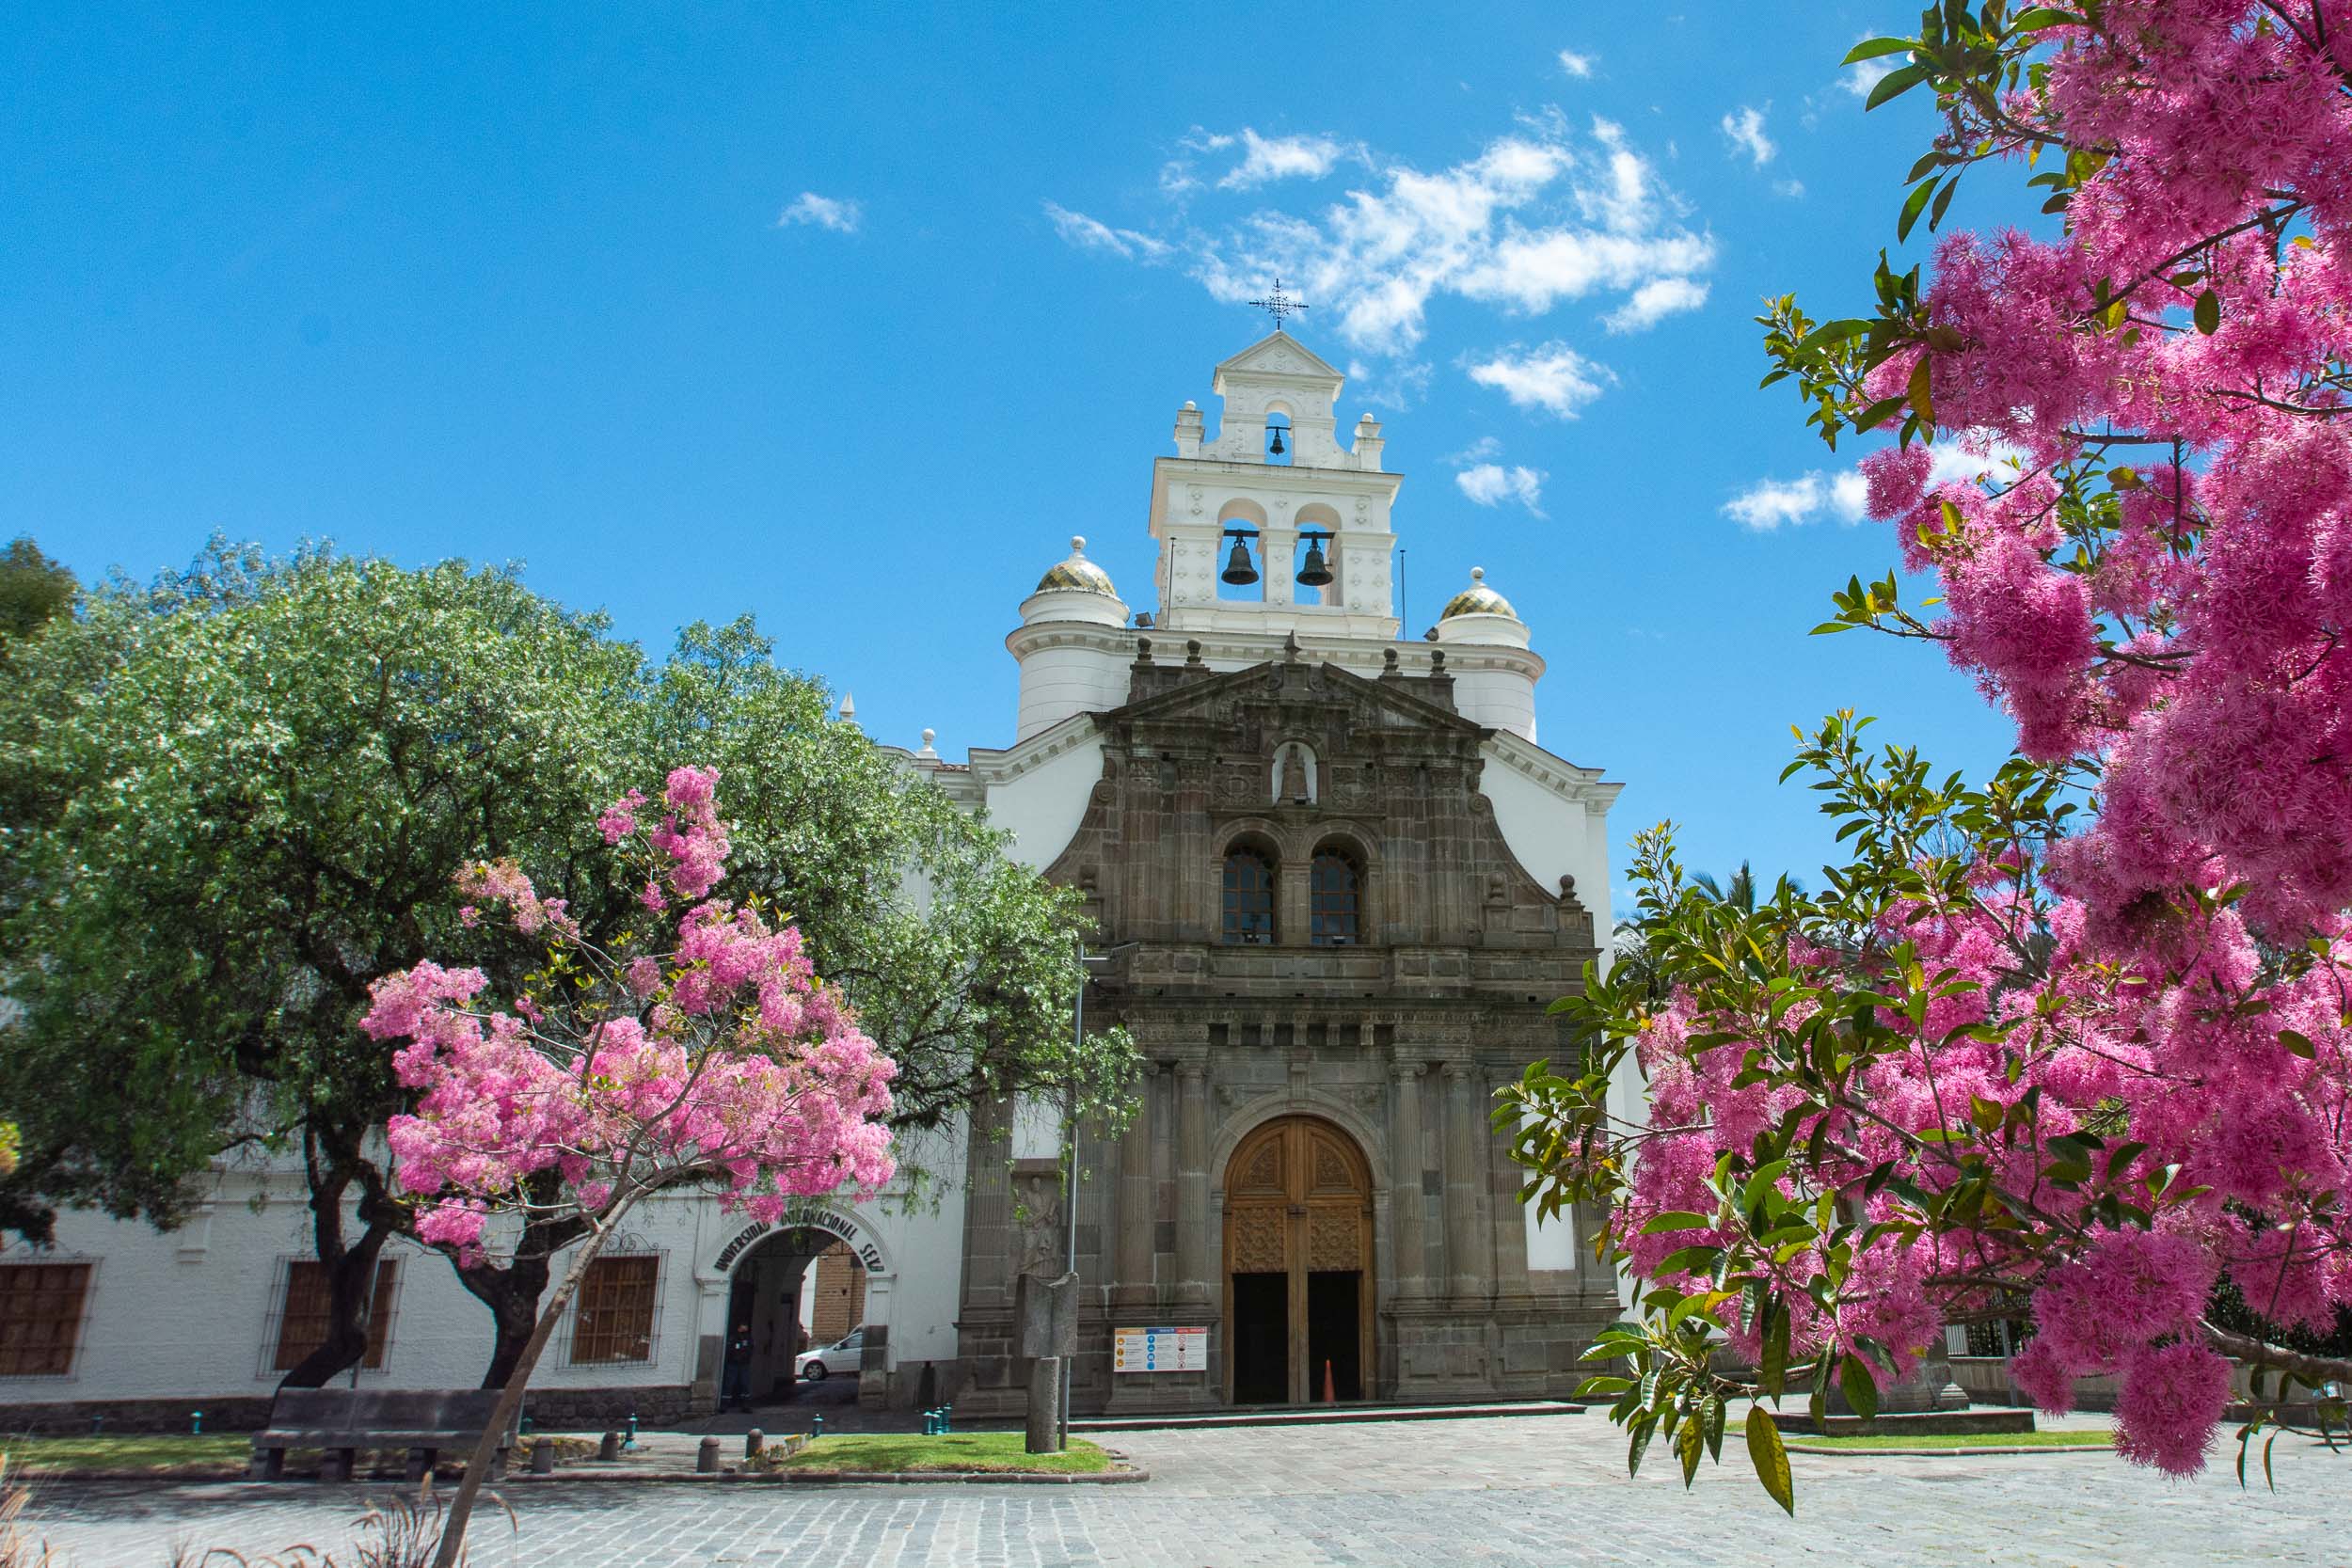 Quito’s colonial history and mysteries